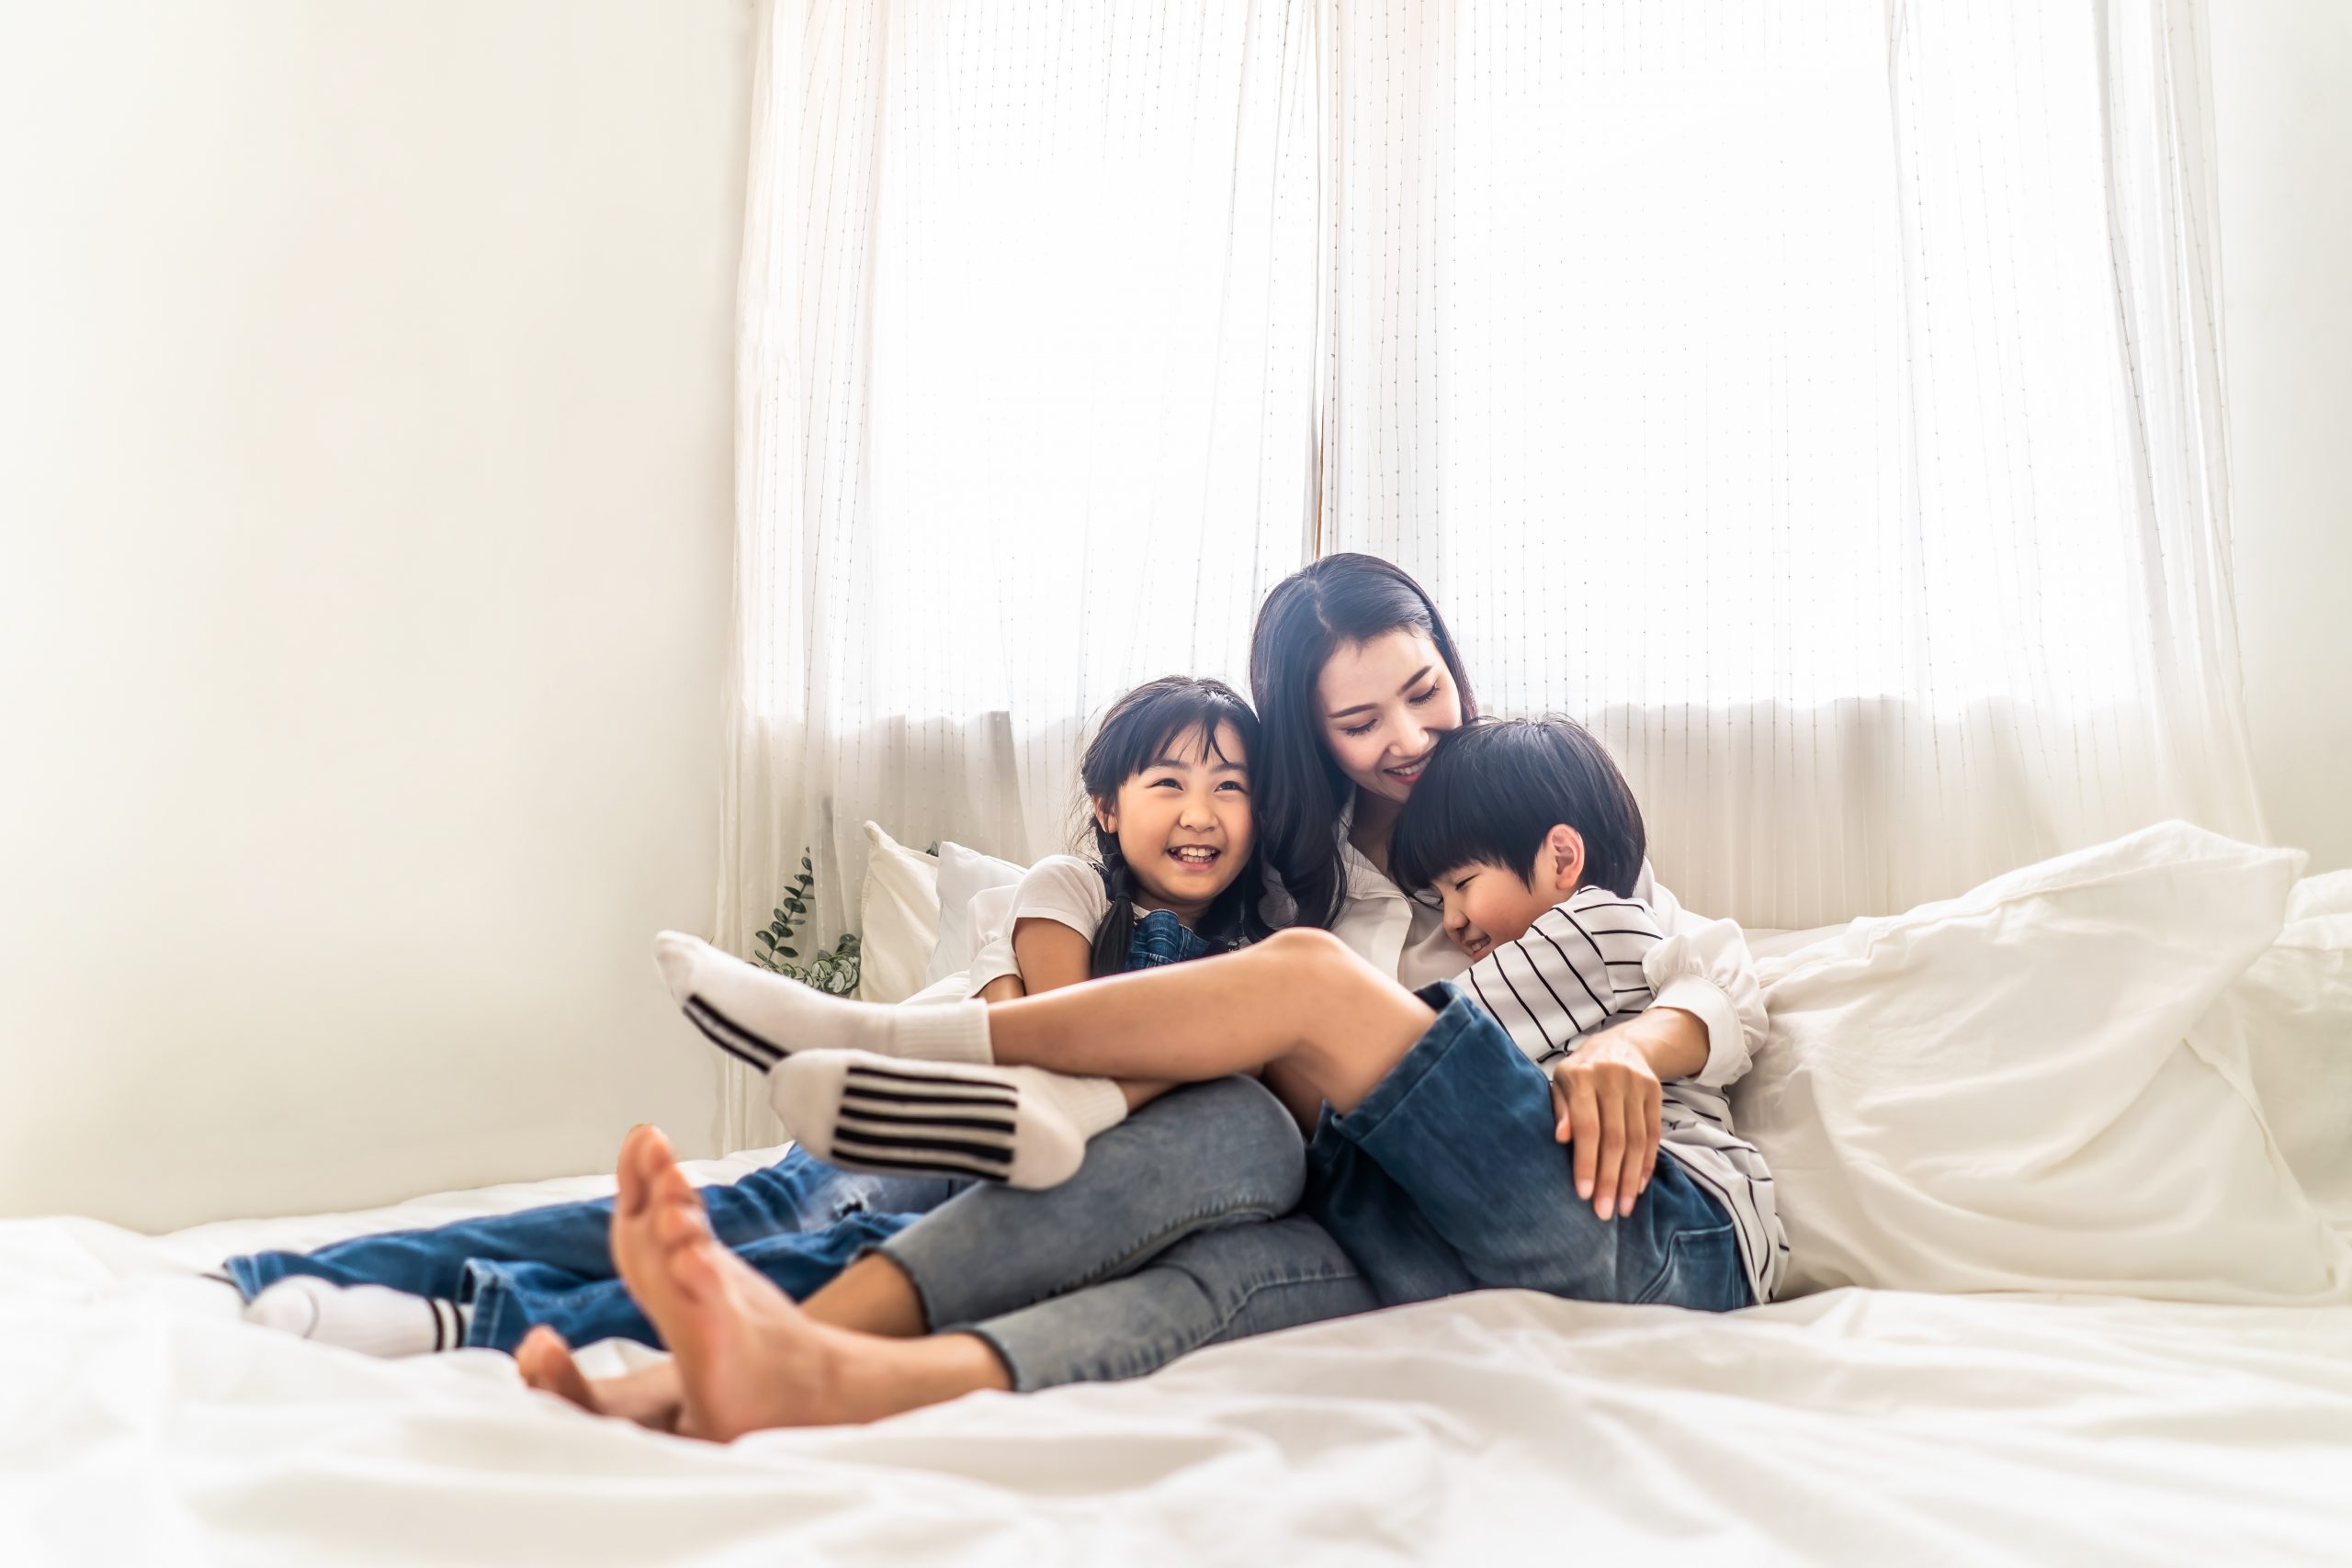 Setting aside a binding child support agreement. Accompanying image: mother, son and daughter sit on bed with happiness and smile in bedroom.